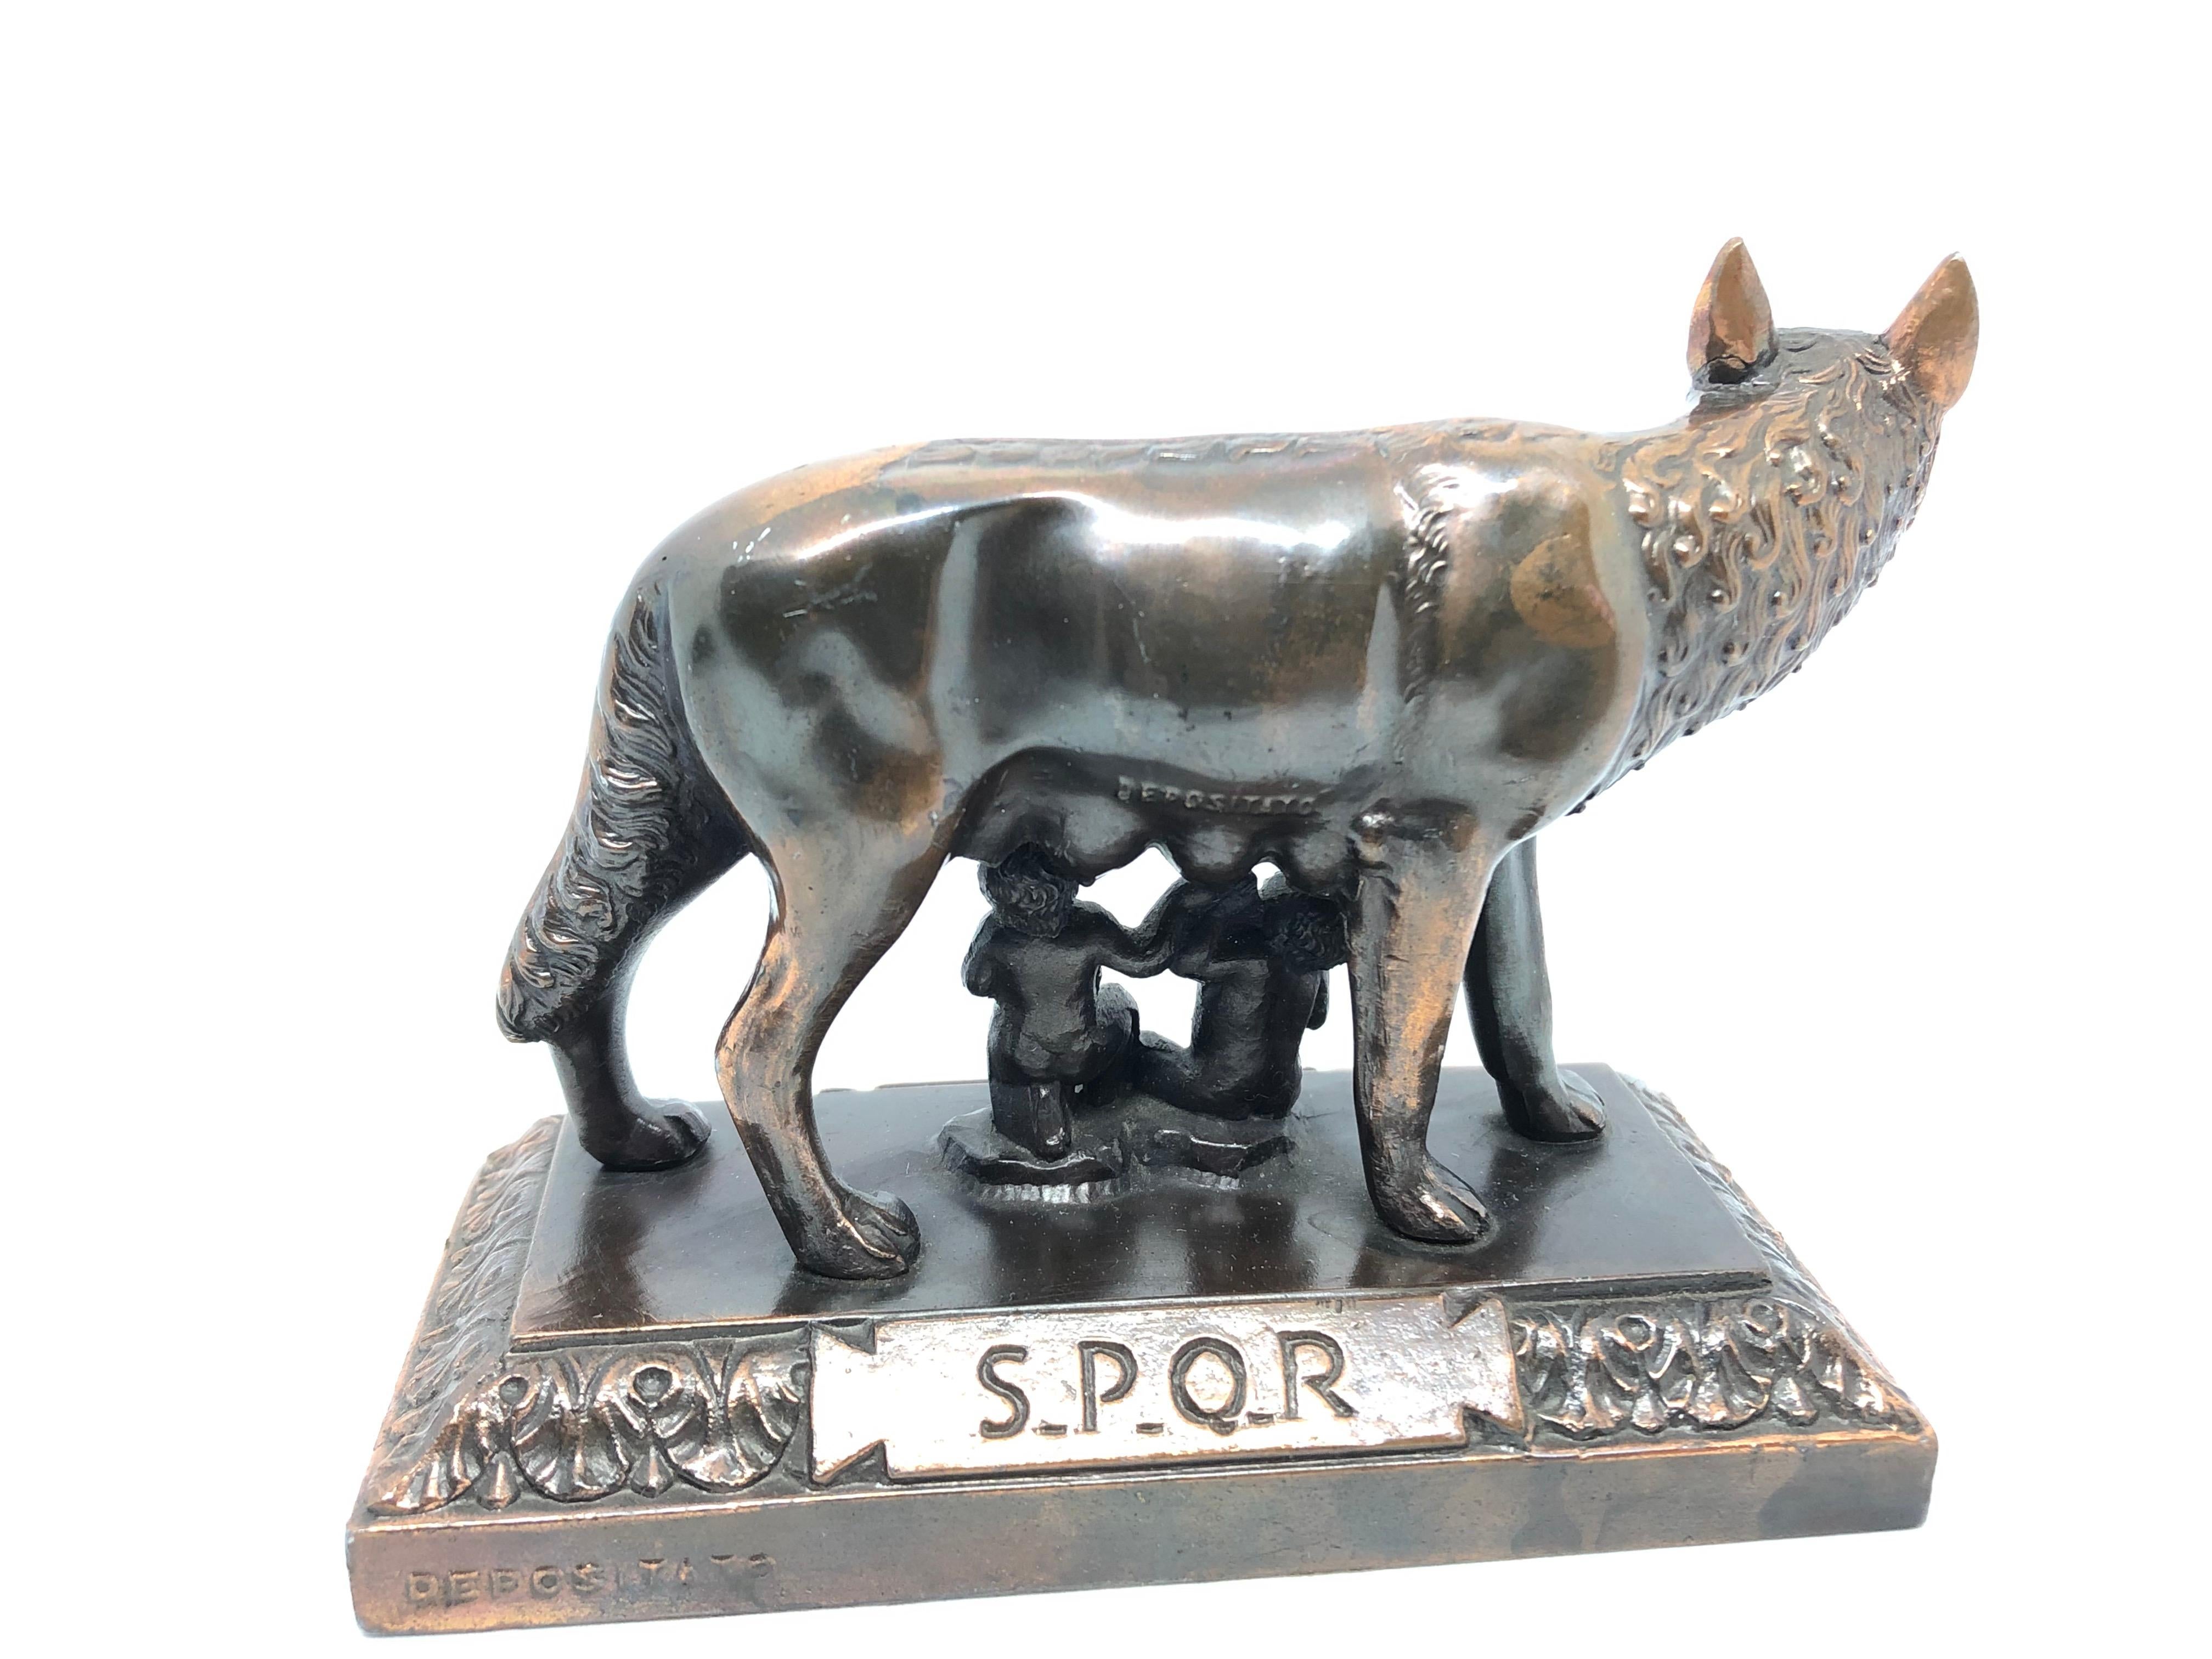 A Wolf of Rome Roma Romulus and Remus 1960s Souvenir Building Architectural Model. Some wear with a nice patina, but this is old-age. Made of metal. This was bought as a souvenir in Rome, Italy and was made in the mid-20th century probably to the